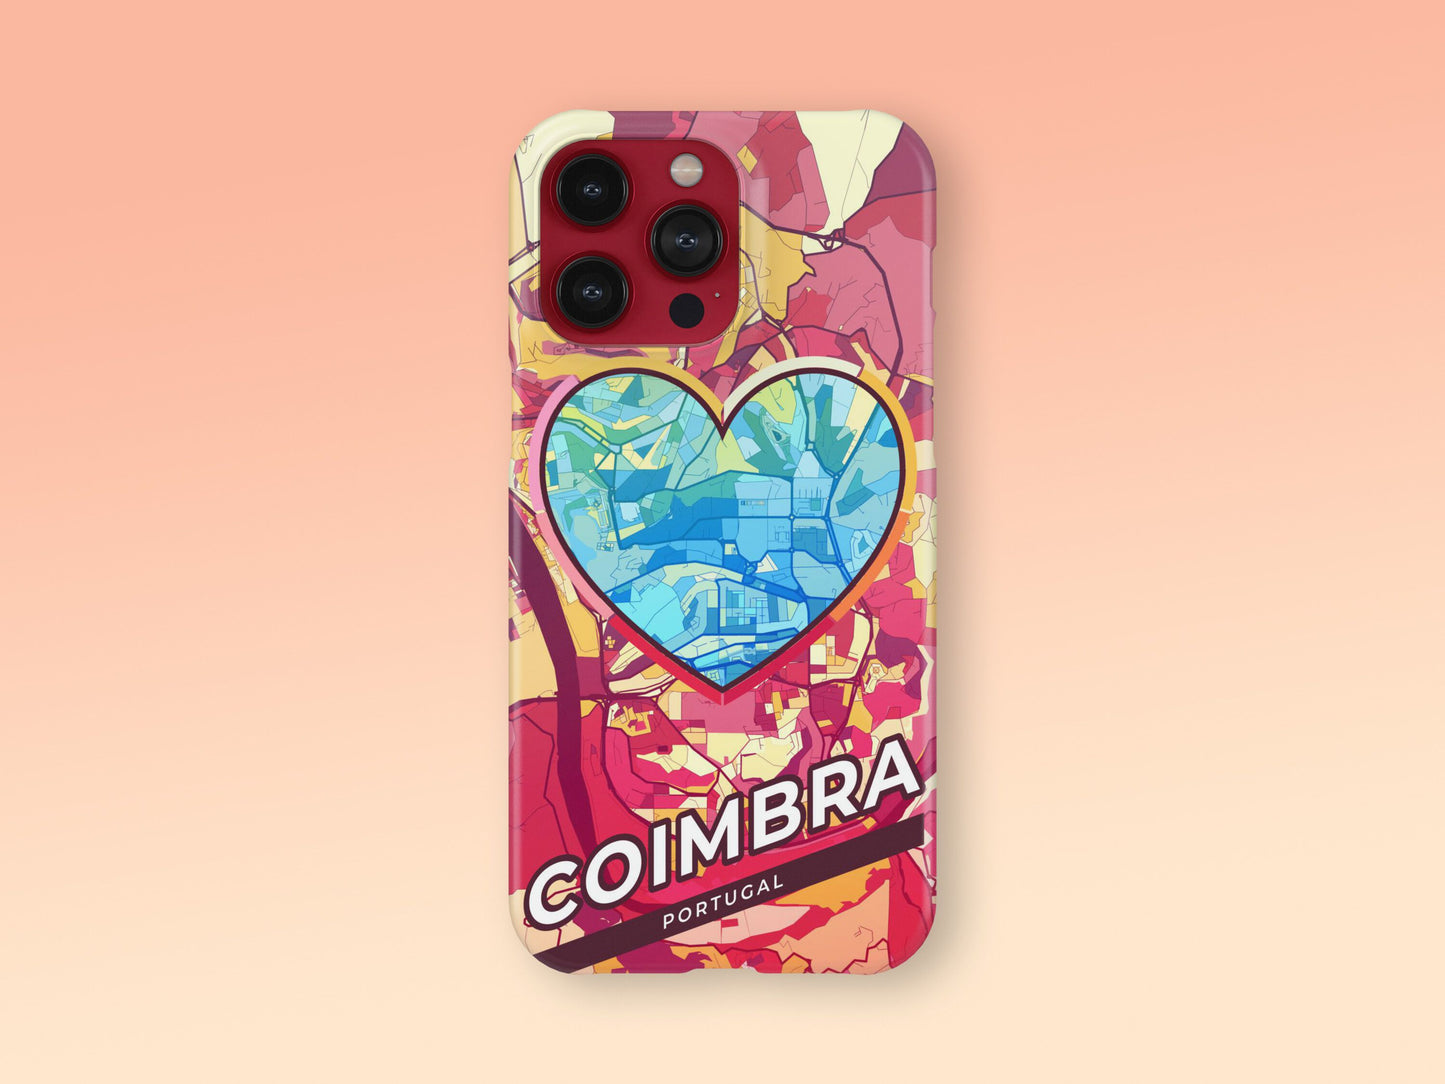 Coimbra Portugal slim phone case with colorful icon. Birthday, wedding or housewarming gift. Couple match cases. 2